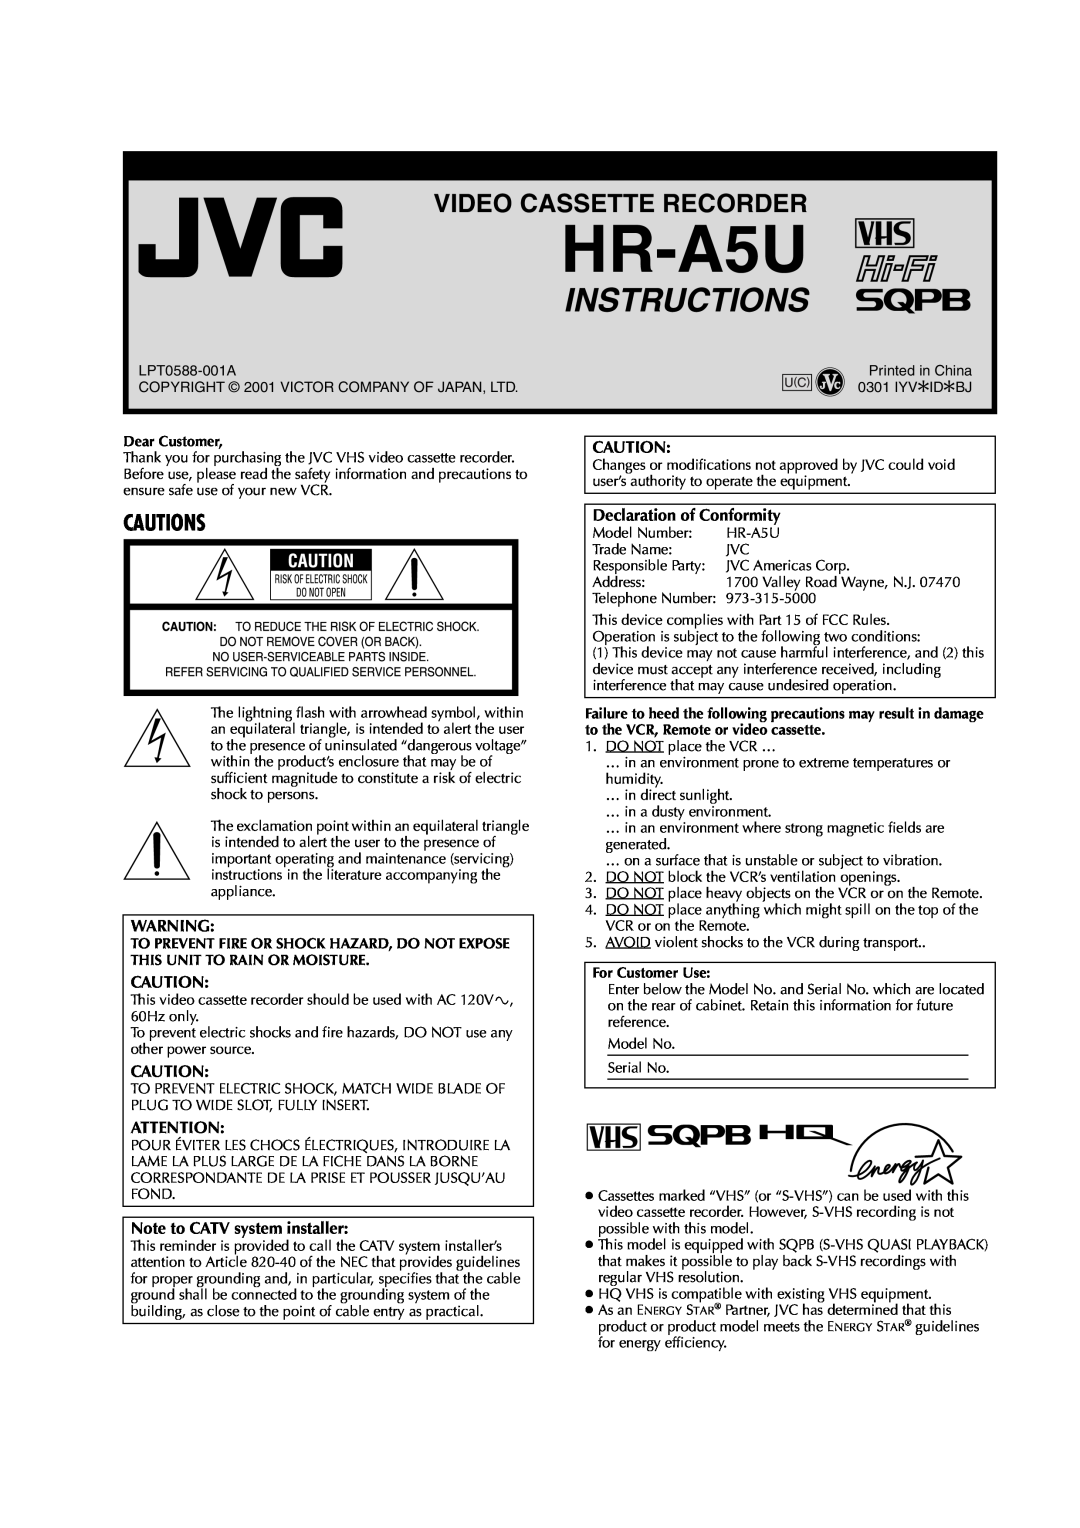 JVC HR-A5U manual Video Cassette Recorder, Cautions, Note to CATV system installer, Declaration of Conformity 